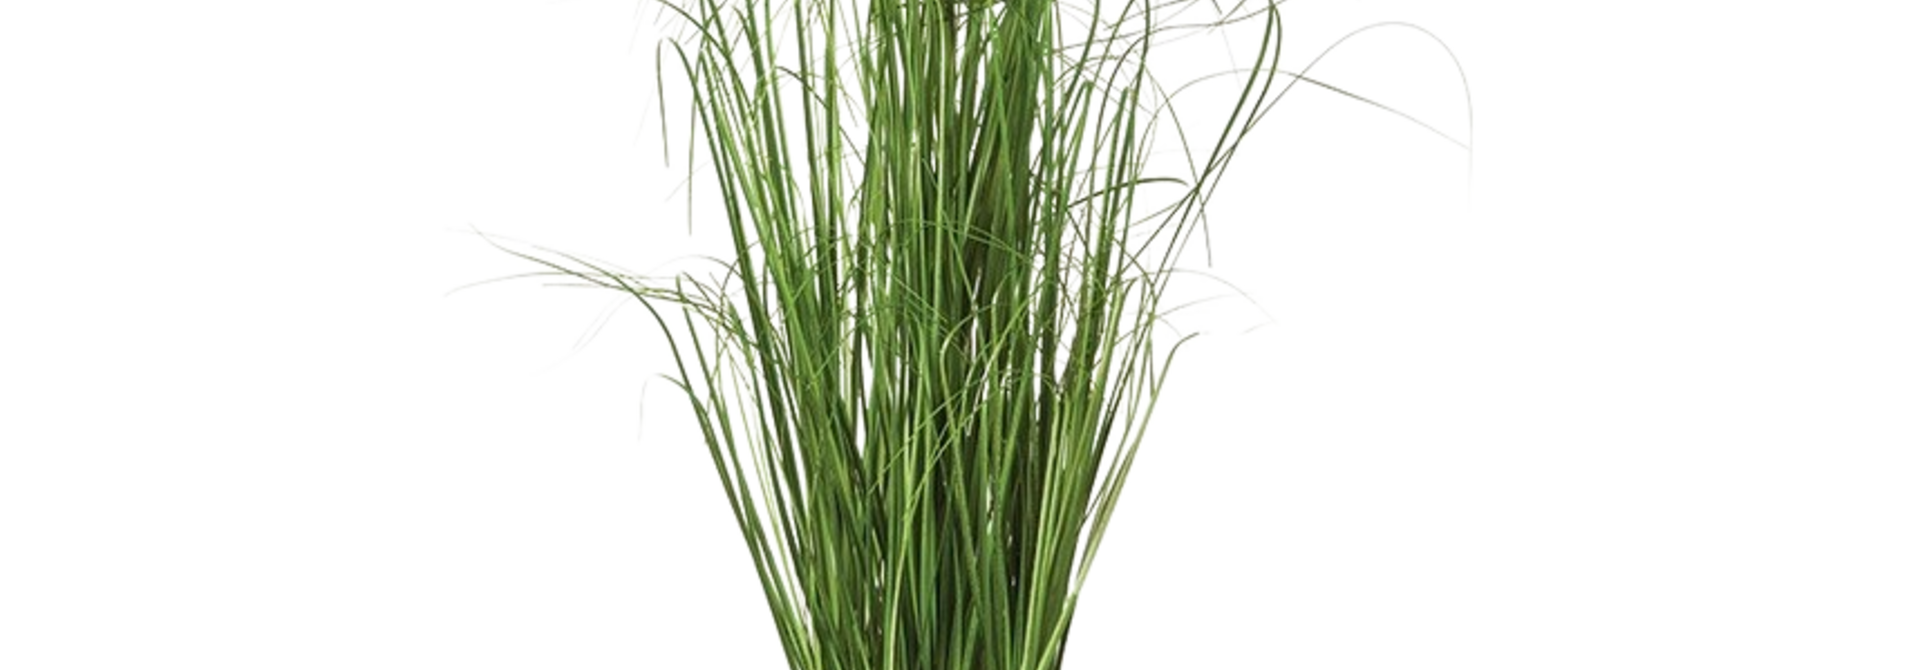 Onion Grass | The Floral Collection, Green - 5 Inch x 5 Inch x 25 Inch